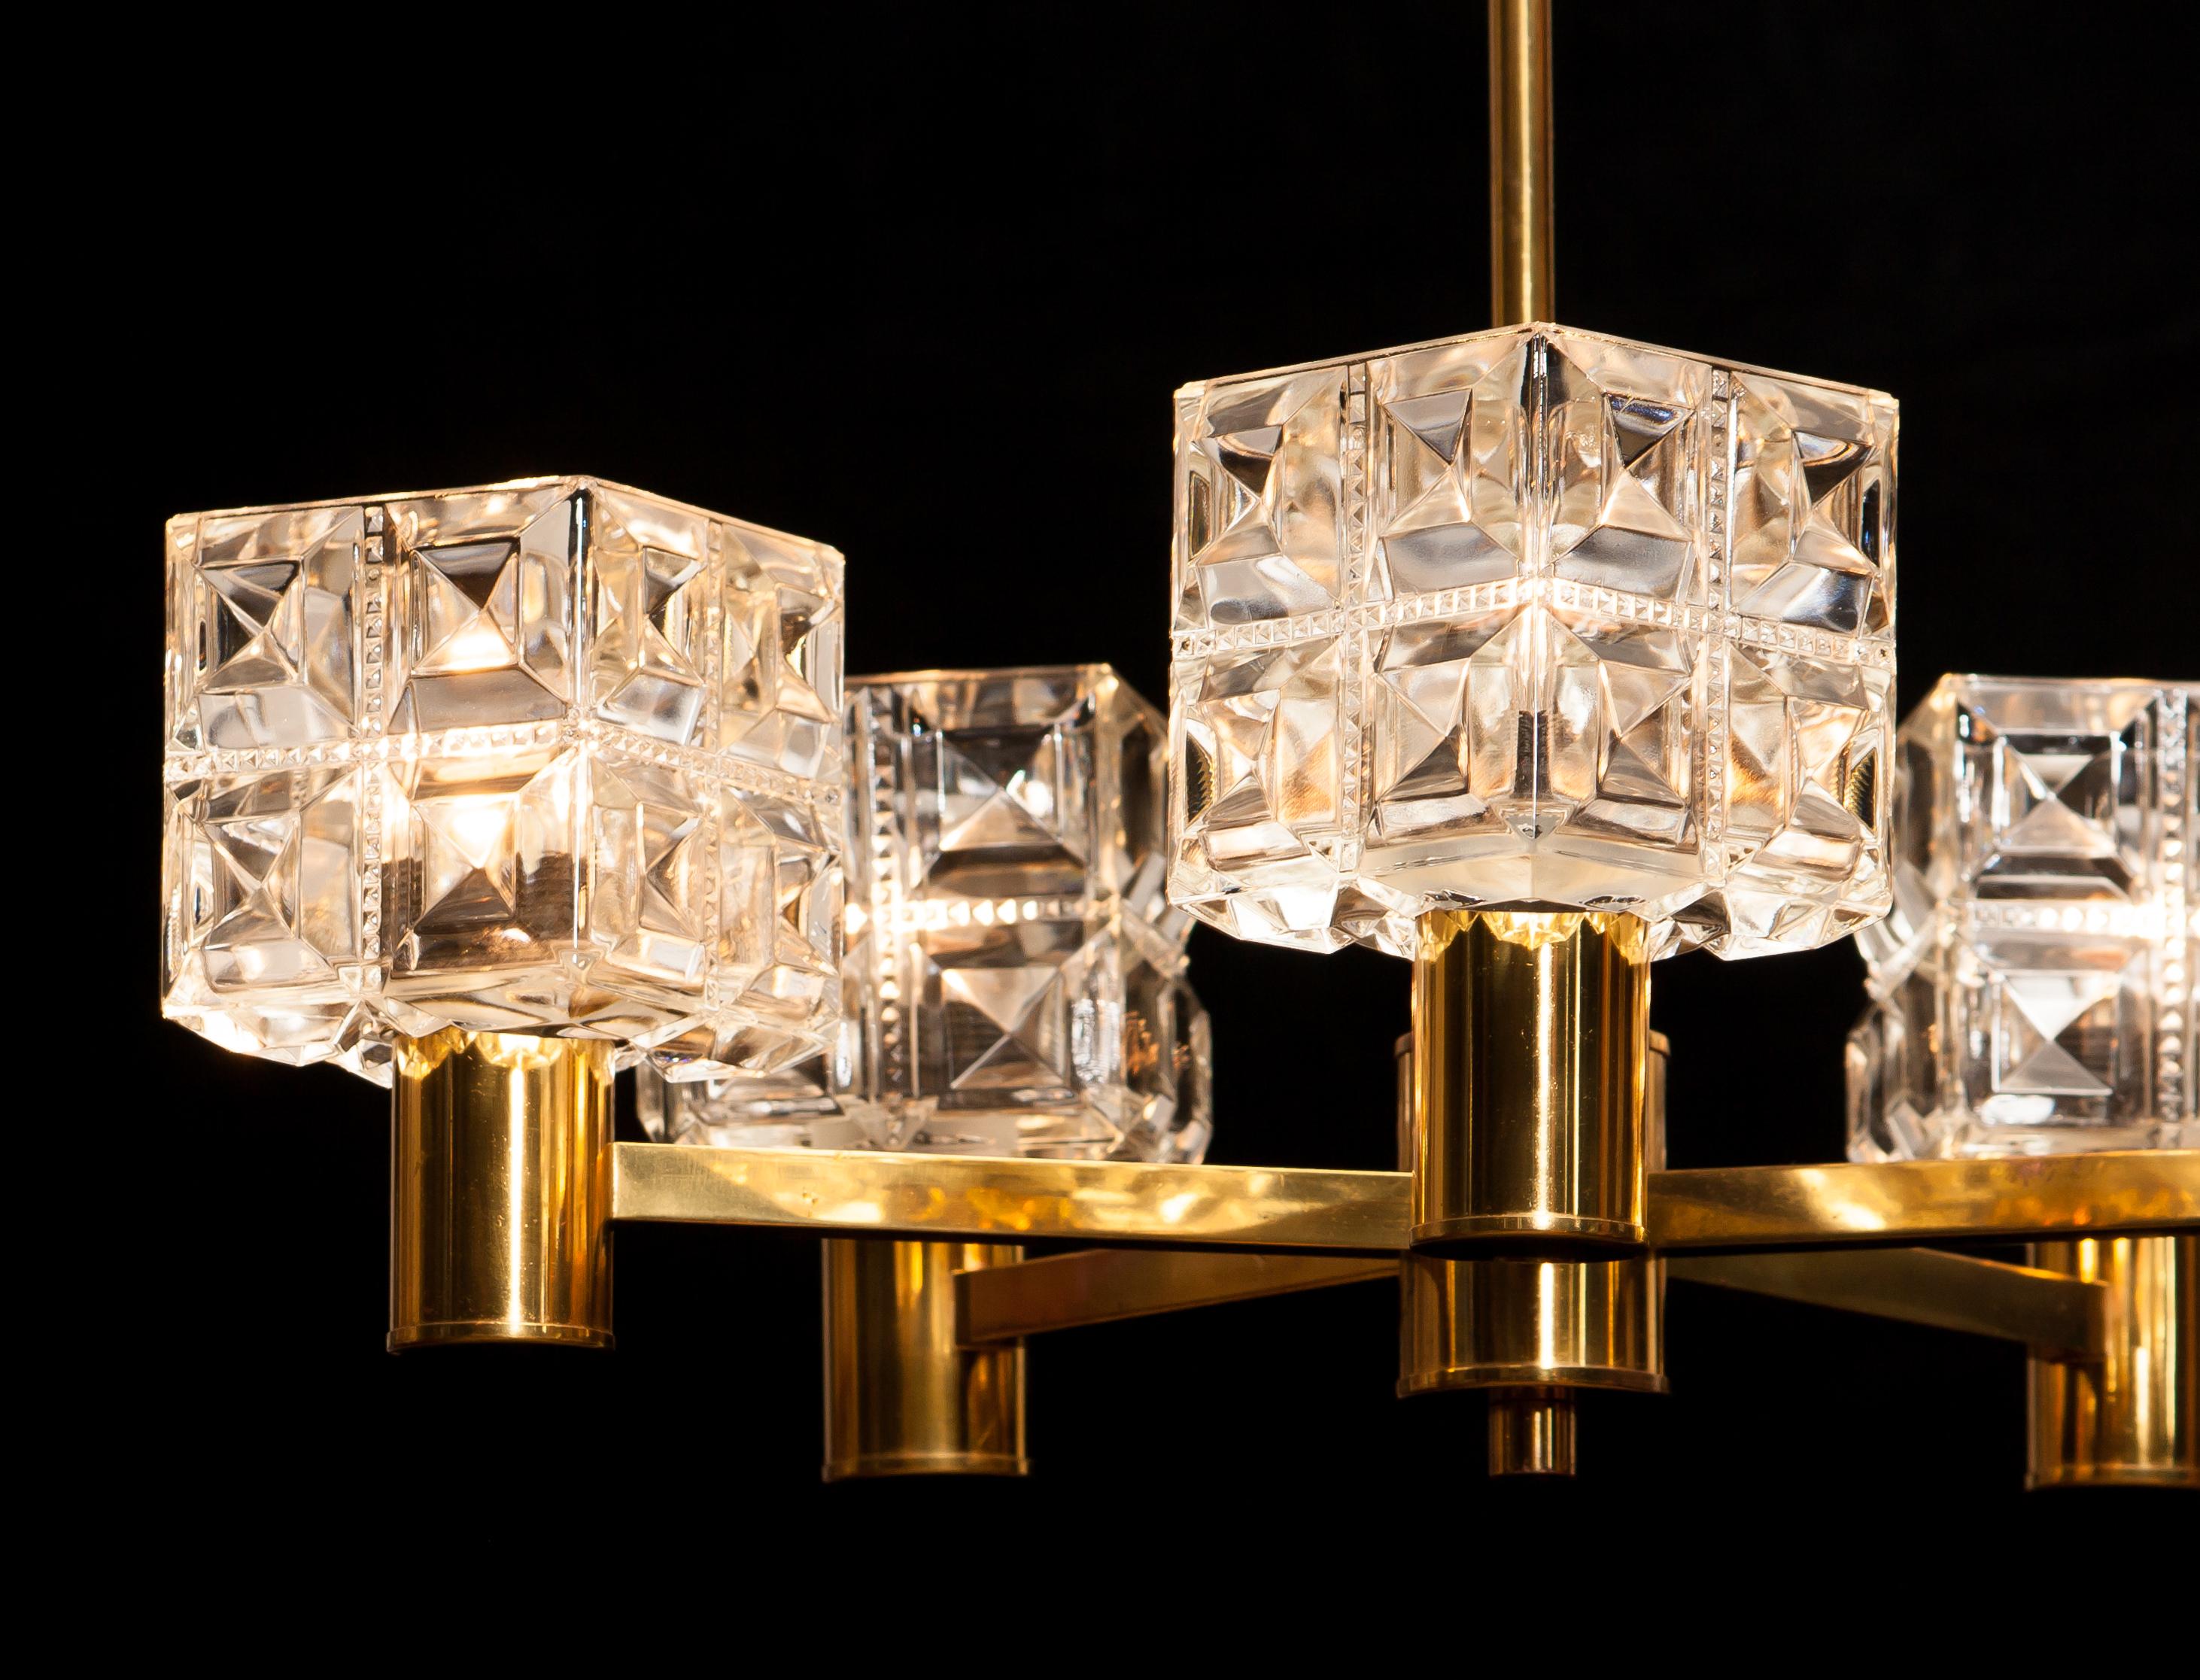 Beautiful chandelier made by Tyringe Konsthantverk, Sweden.
This lamp is made of five brass arms with glass shades.
It is in a very nice condition.
Period 1950s.
Dimensions: H 66 cm, ø 54 cm.
 